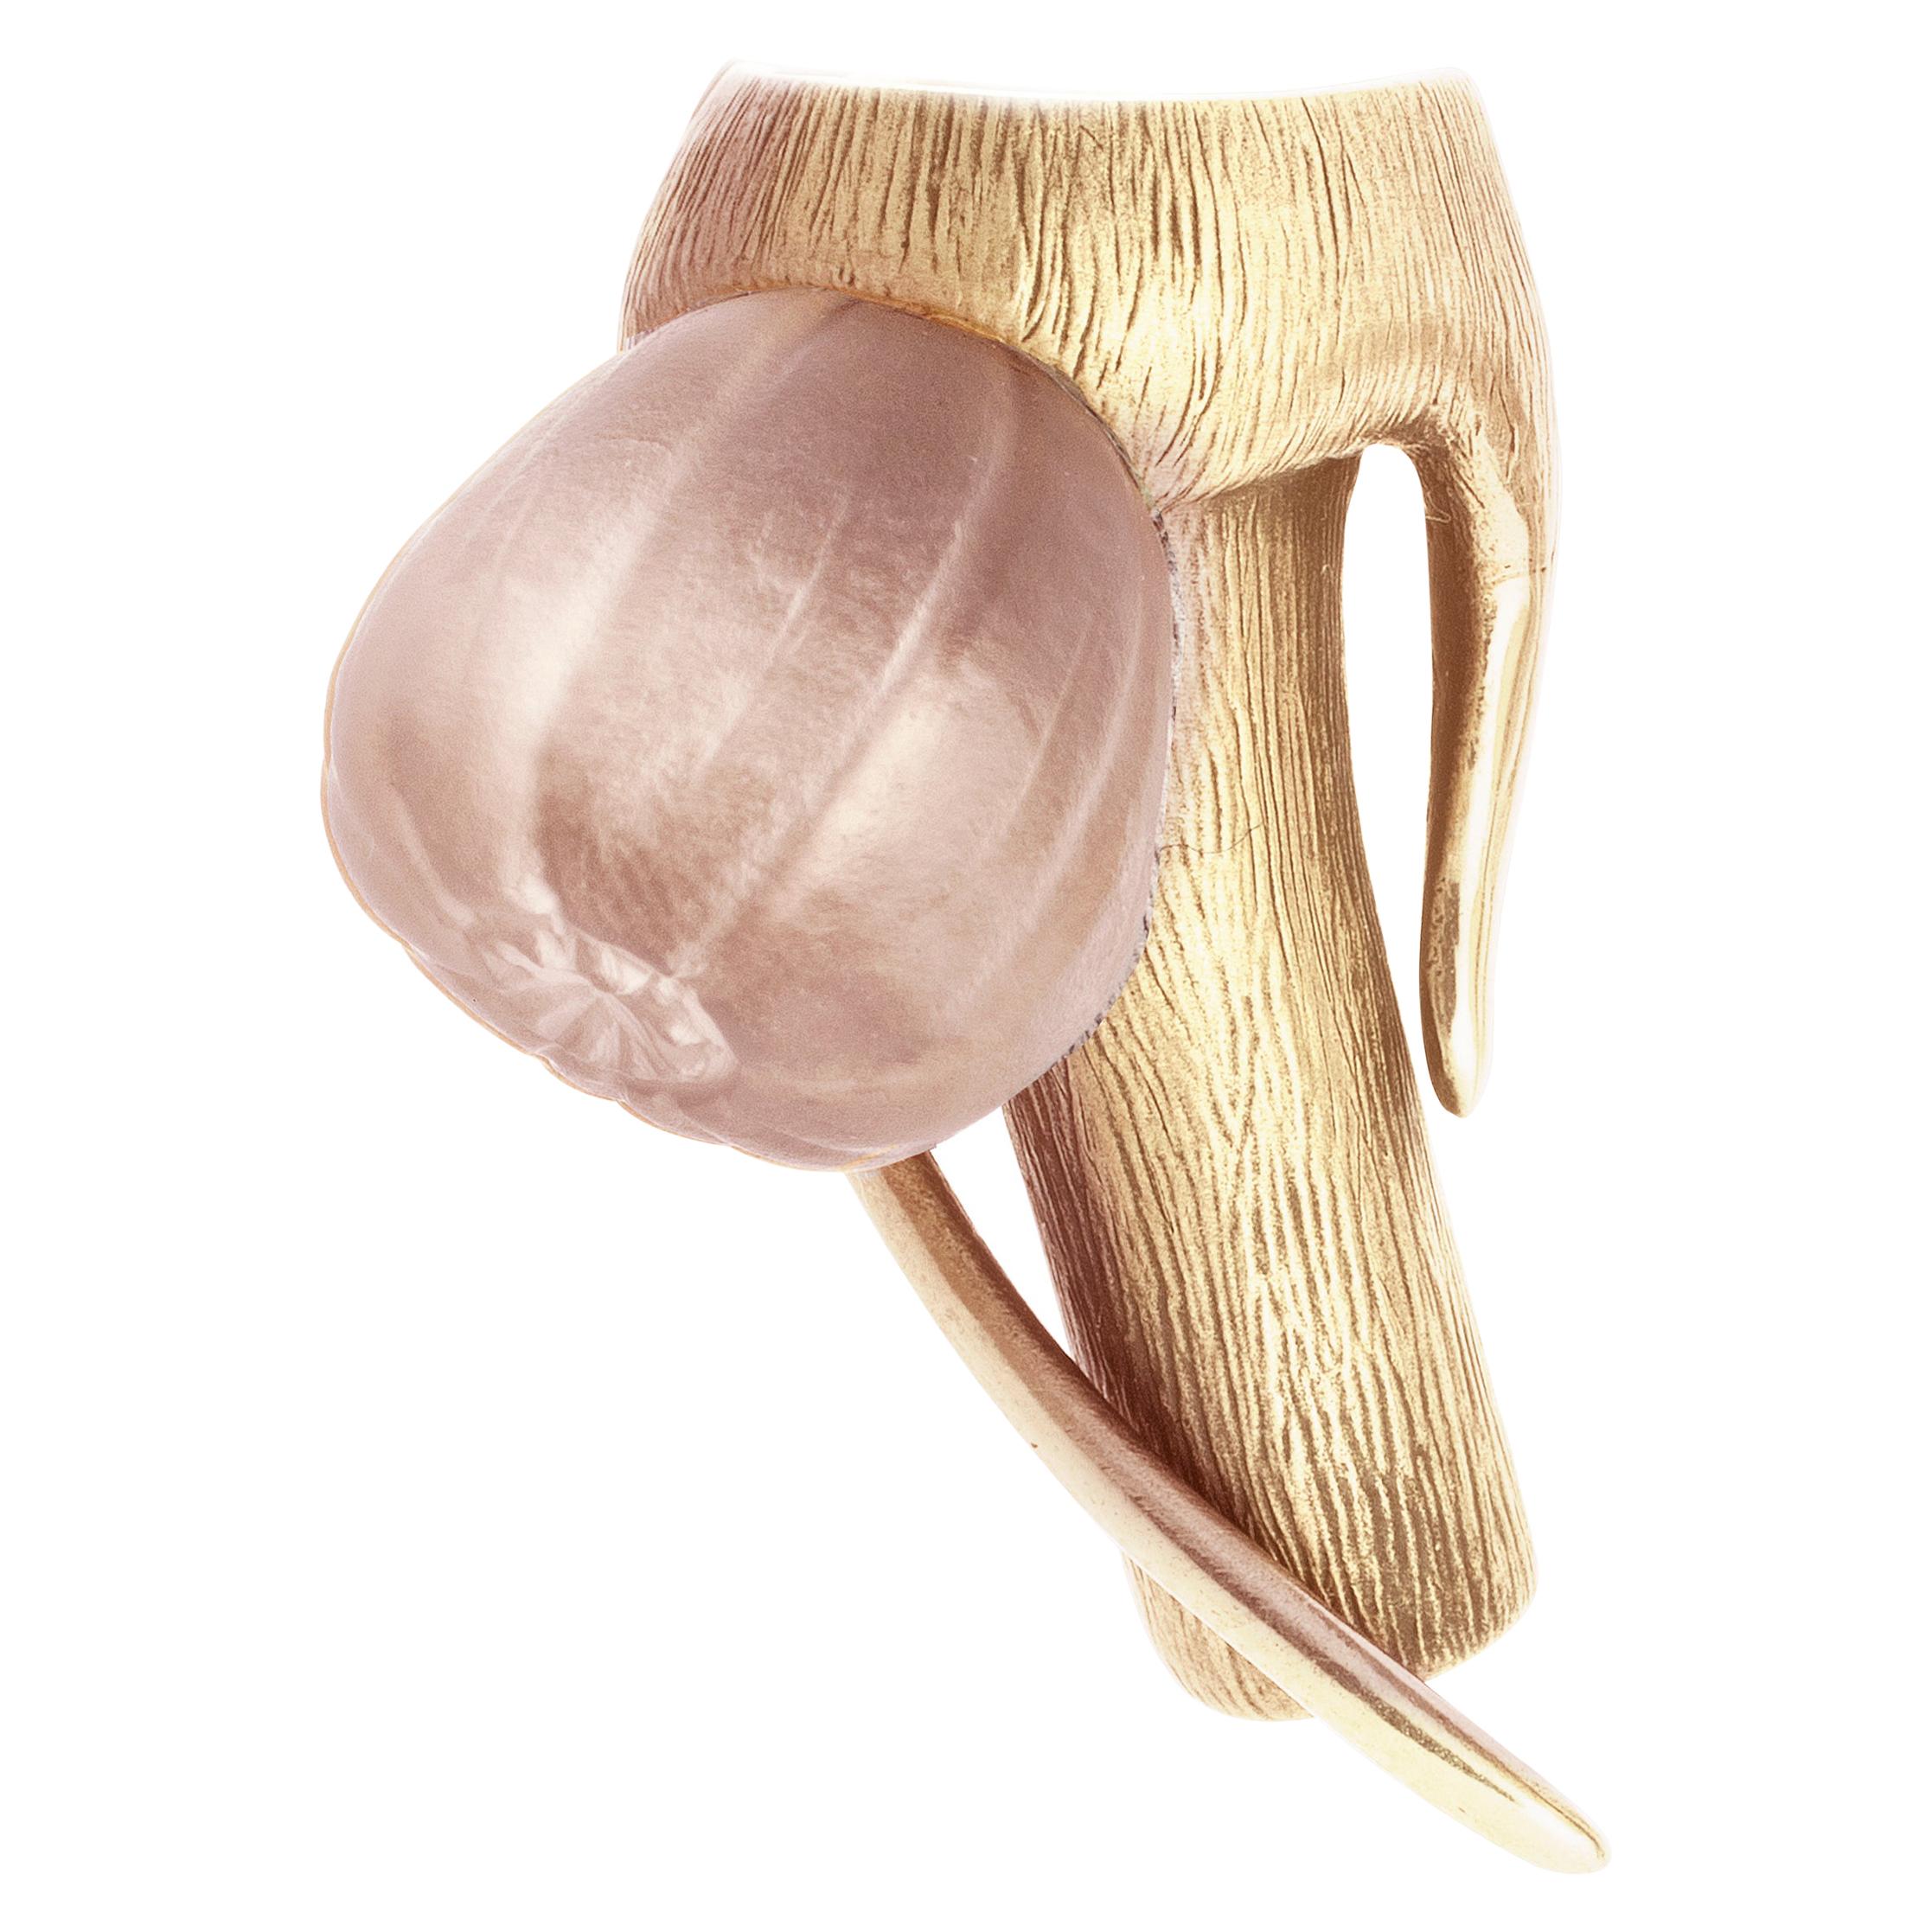 This contemporary Fig brooch is made of 14 karat rose gold and features a beautiful rose onyx. The collection has been featured in editorial reviews by Vogue UA and Harper's Bazaar UA.

The fig fruit is a handcrafted sculpture made of rose onyx,